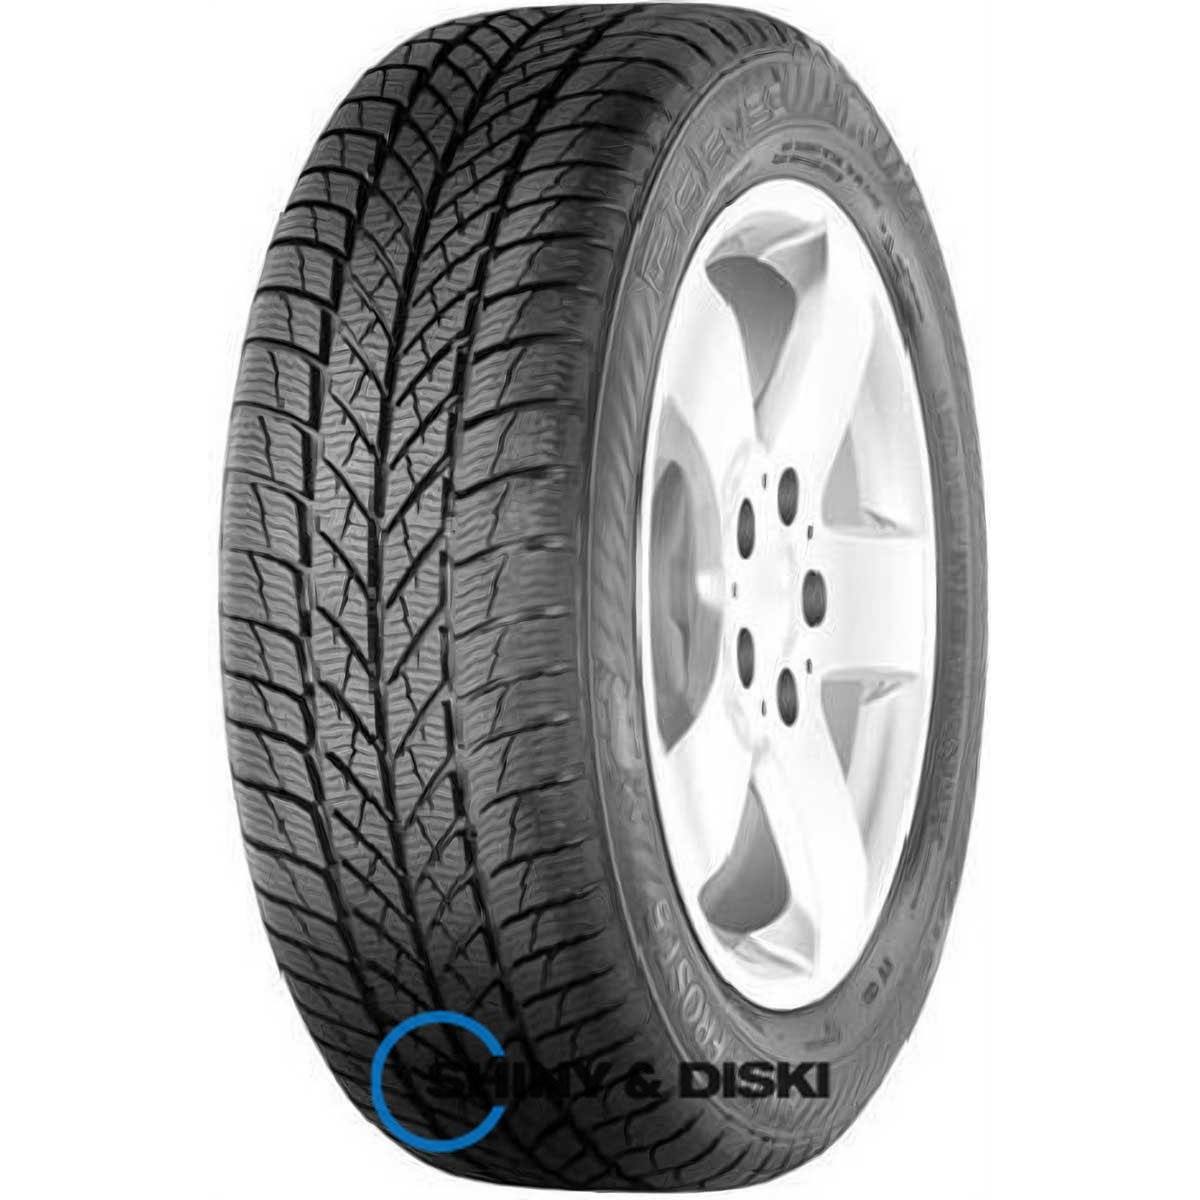 gislaved euro frost 5 185/60 r14 82t